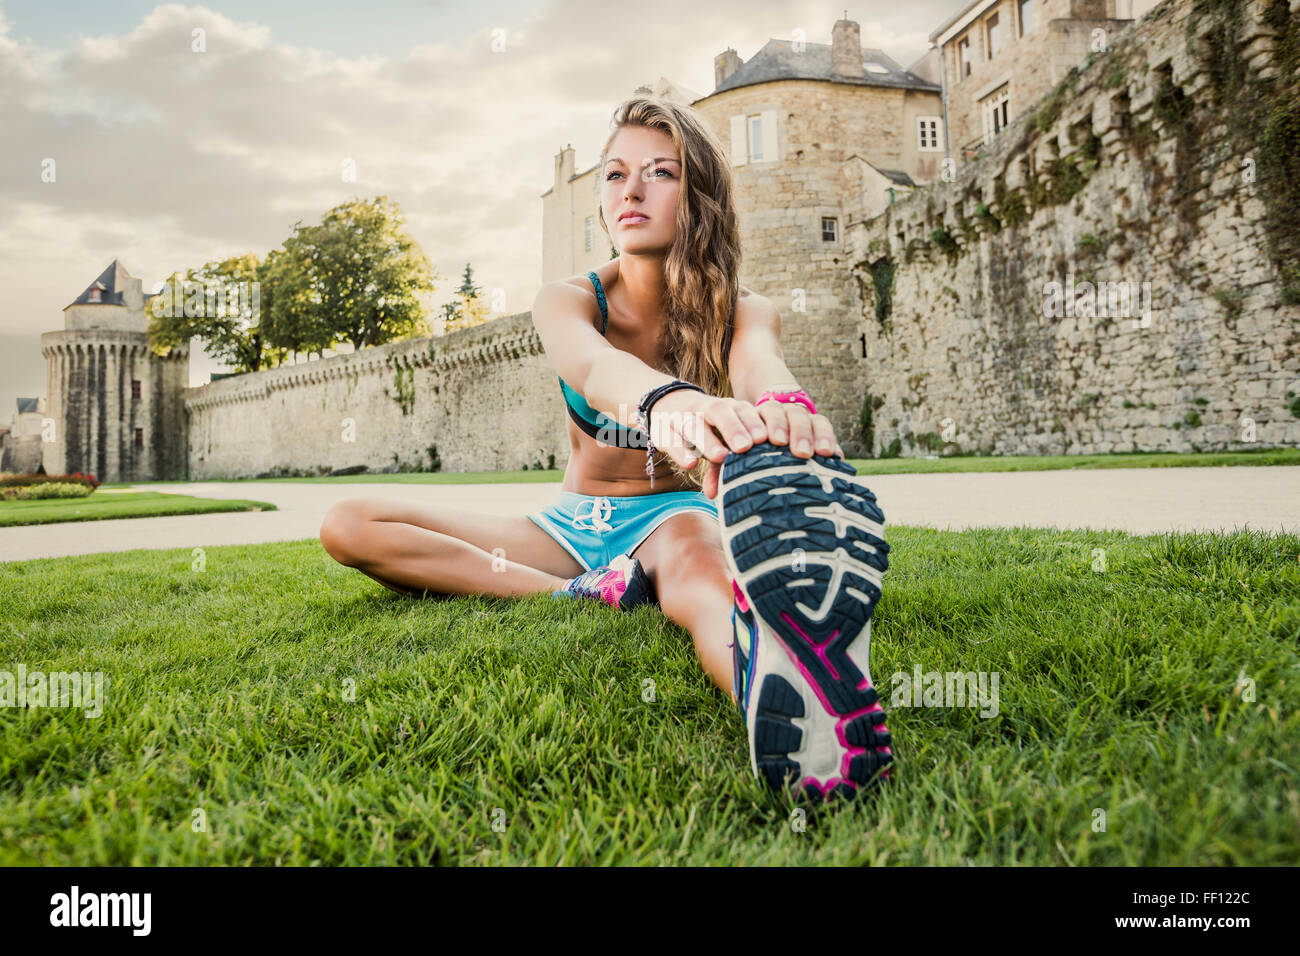 Caucasian woman stretching outdoors Banque D'Images